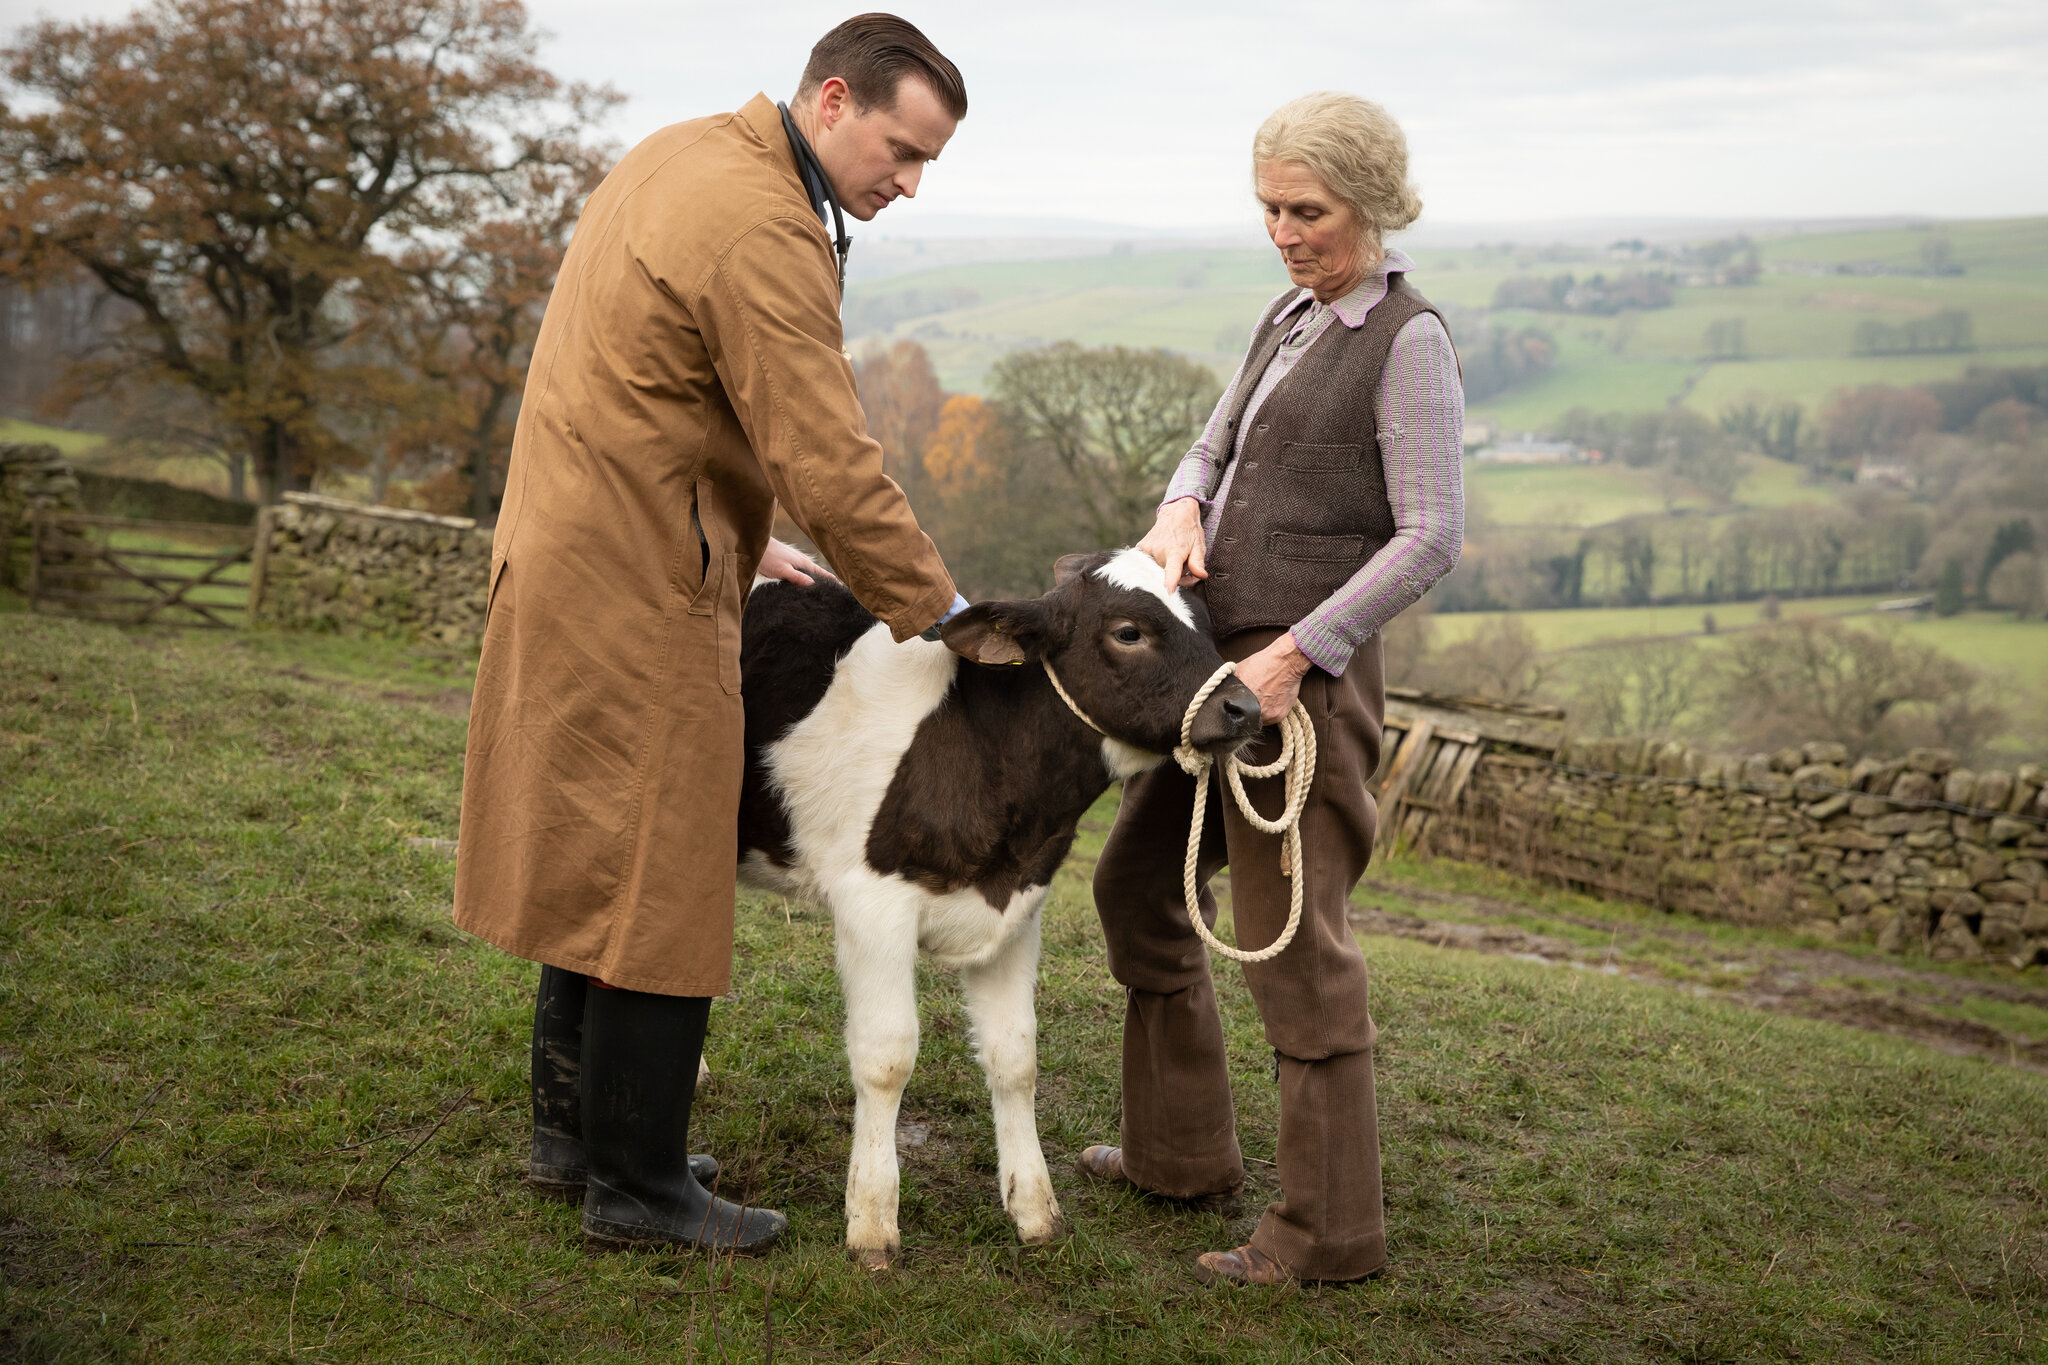 Herriot and a farmer care for a calf in a shot from All Creatures Great and Small, 2020. (Photo by Playground Entertainment/PBS).